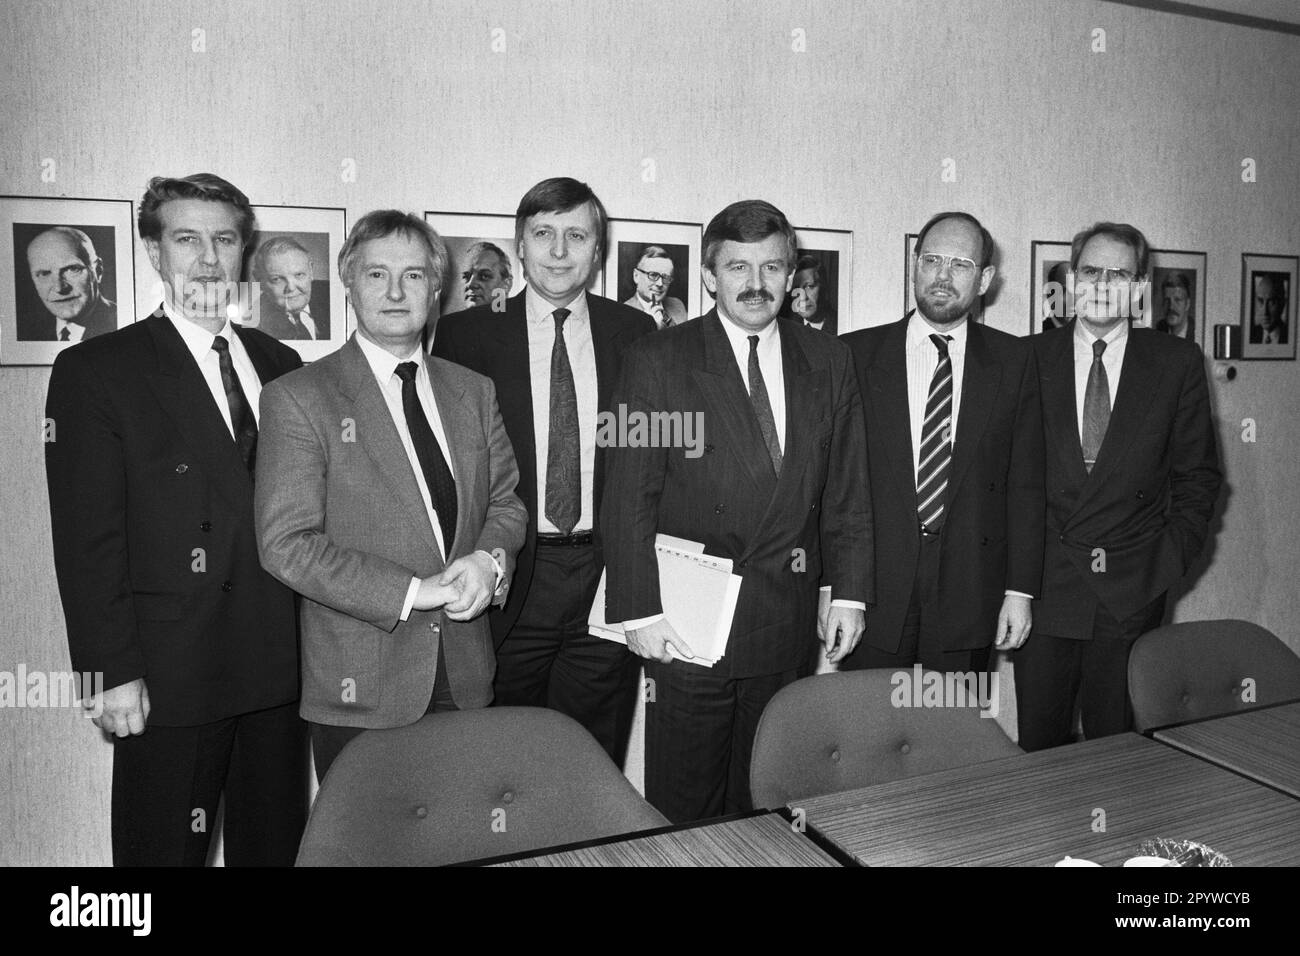 Germany, Bonn, 01.03.1991 Archive No.: 25-64-34 Minister of Economics Moellemann meets Eastern Minister of Economics Photo: from left to right: Conrad-Michael Lehment, Minister of Economics of Mecklenburg-Western Pomerania, Horst Rehberger, Minister of Economics of Saxony-Anhalt, Kajo Schommer, Minister of Economics of Saxony, Juergen Moellemann, Federal Minister of Economics, Walter Hirche, Minister of Economics of Brandenburg and Hans-Juergen Schultz, Minister of Economics and Technology, Thuringia [automated translation] Stock Photo